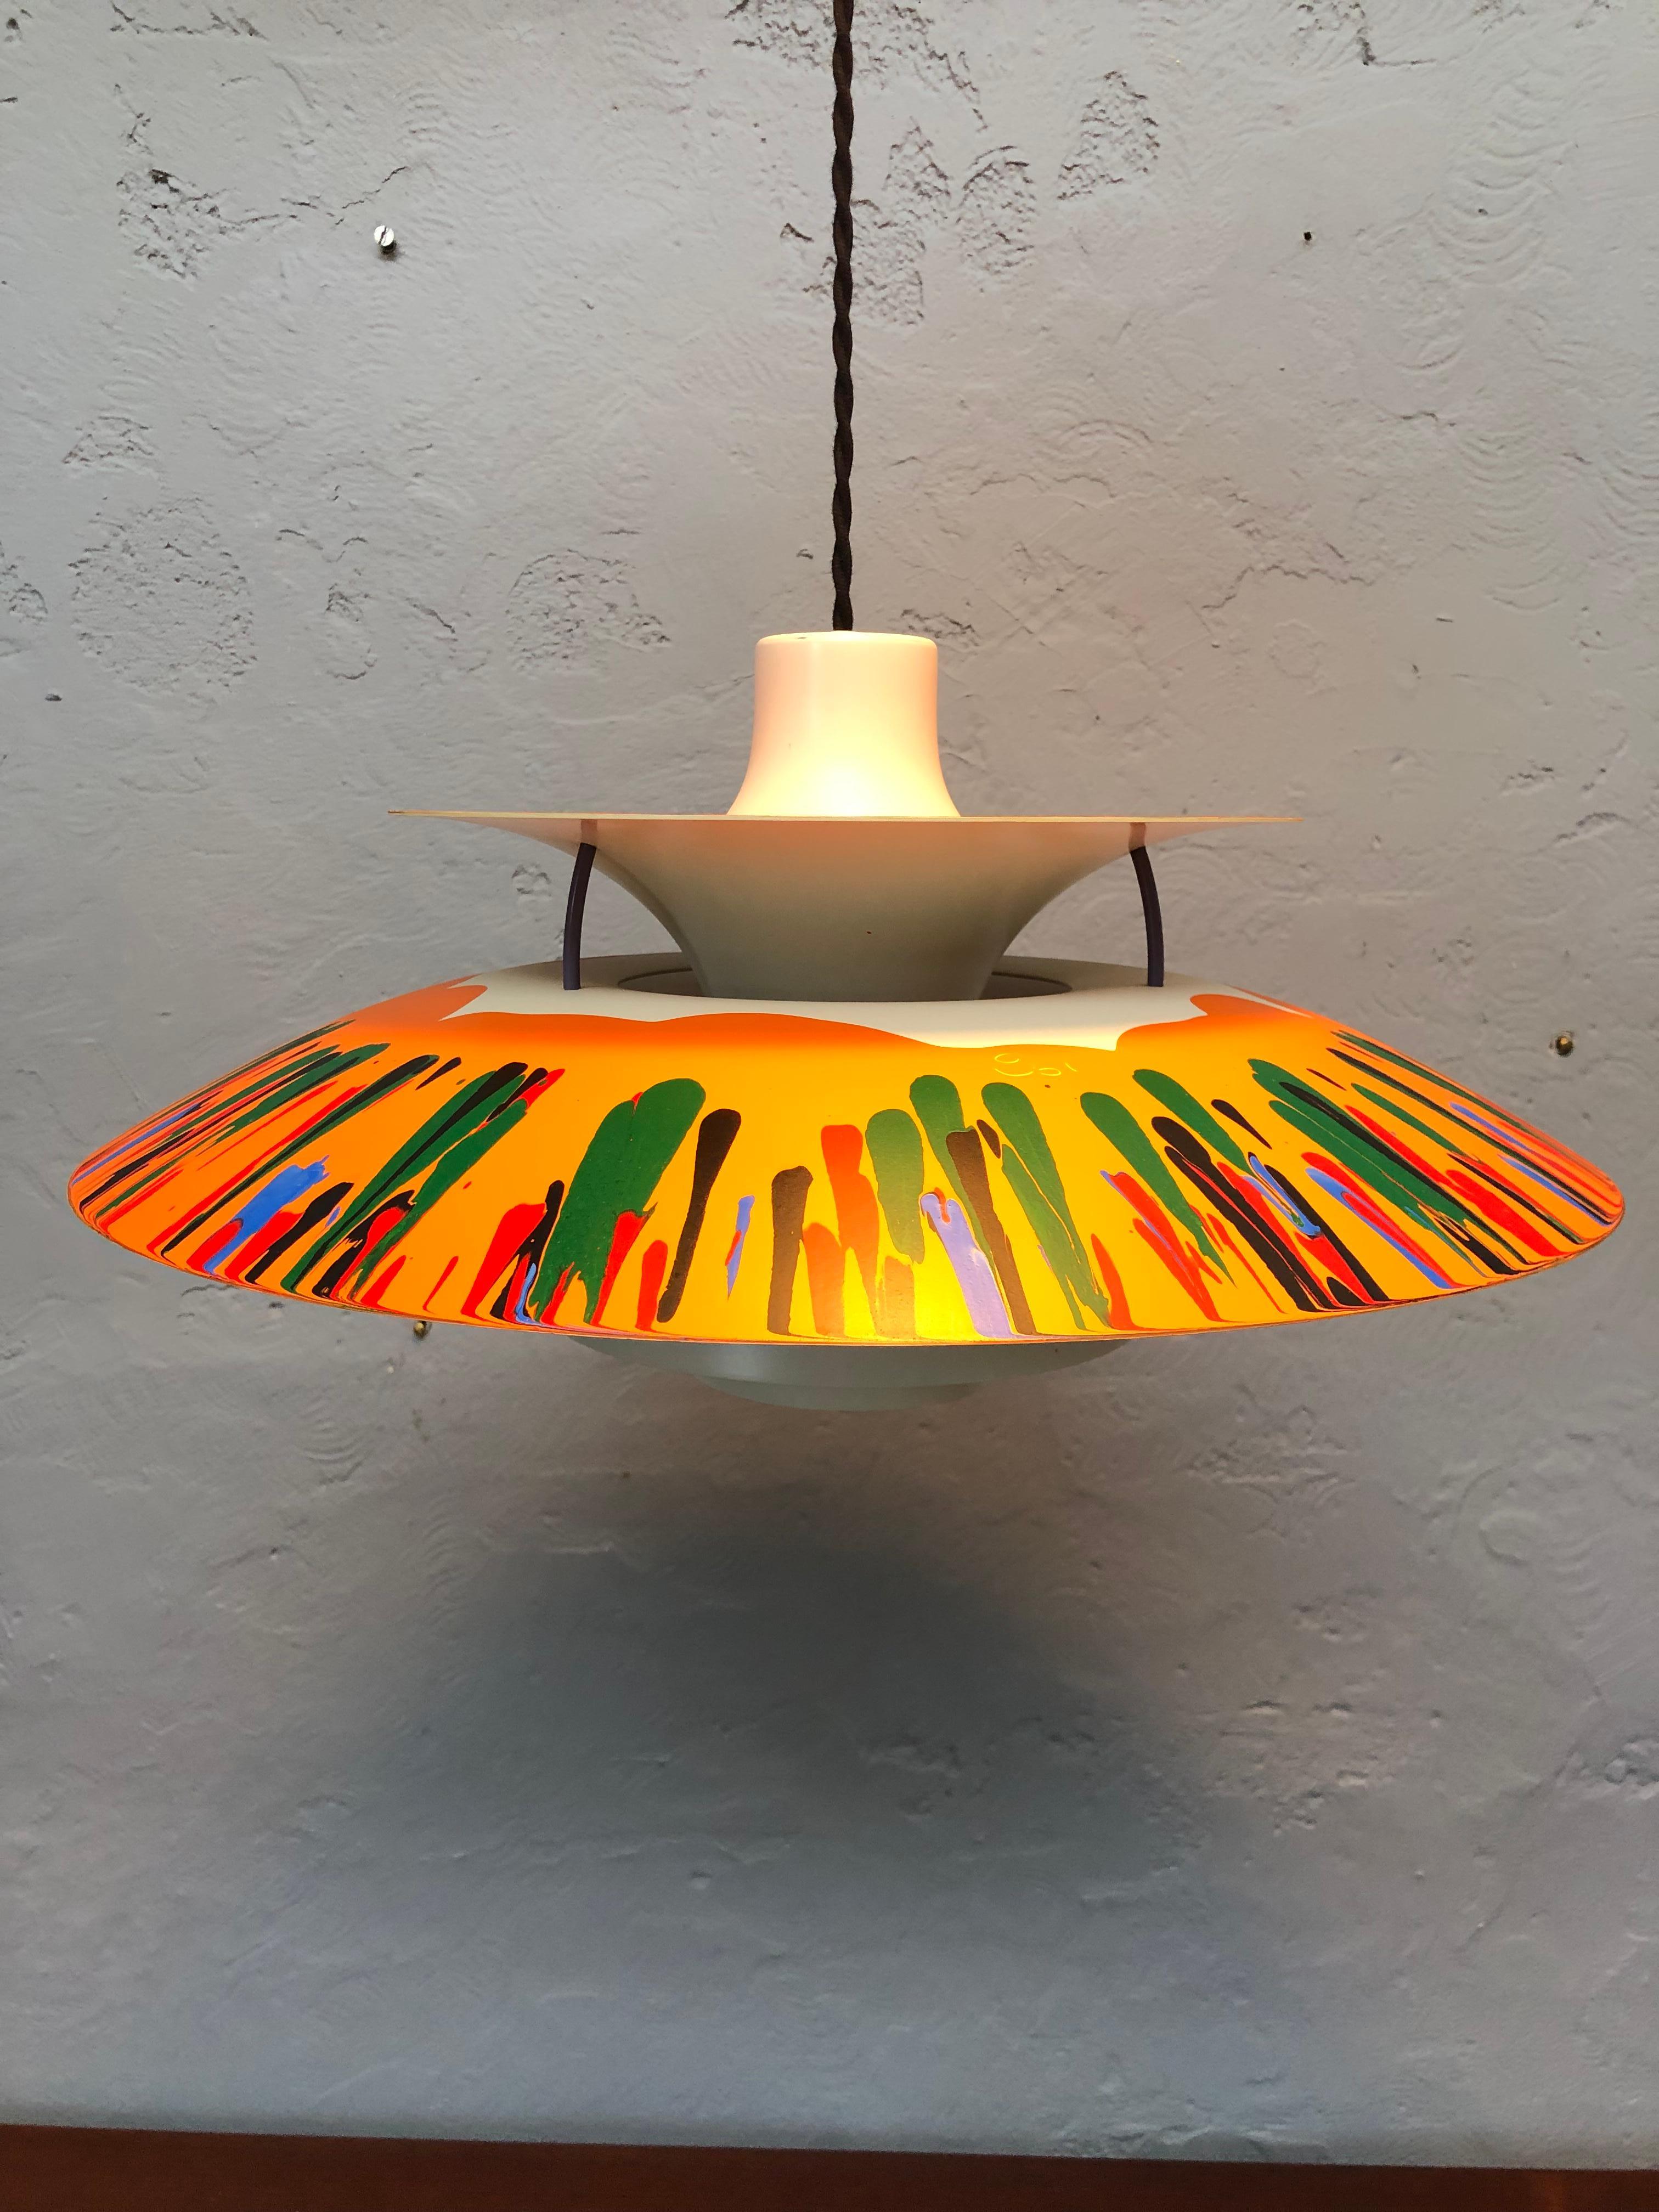 Iconic Vintage PH5 chandelier by Poul Henningsen for Louis Poulsen of Denmark from the 1990s with abstract art work by G61.
Entitled “Cypress Sunset”
The art work is acrylic paint with a clear coat finish on top. 
All types of abstract art share a